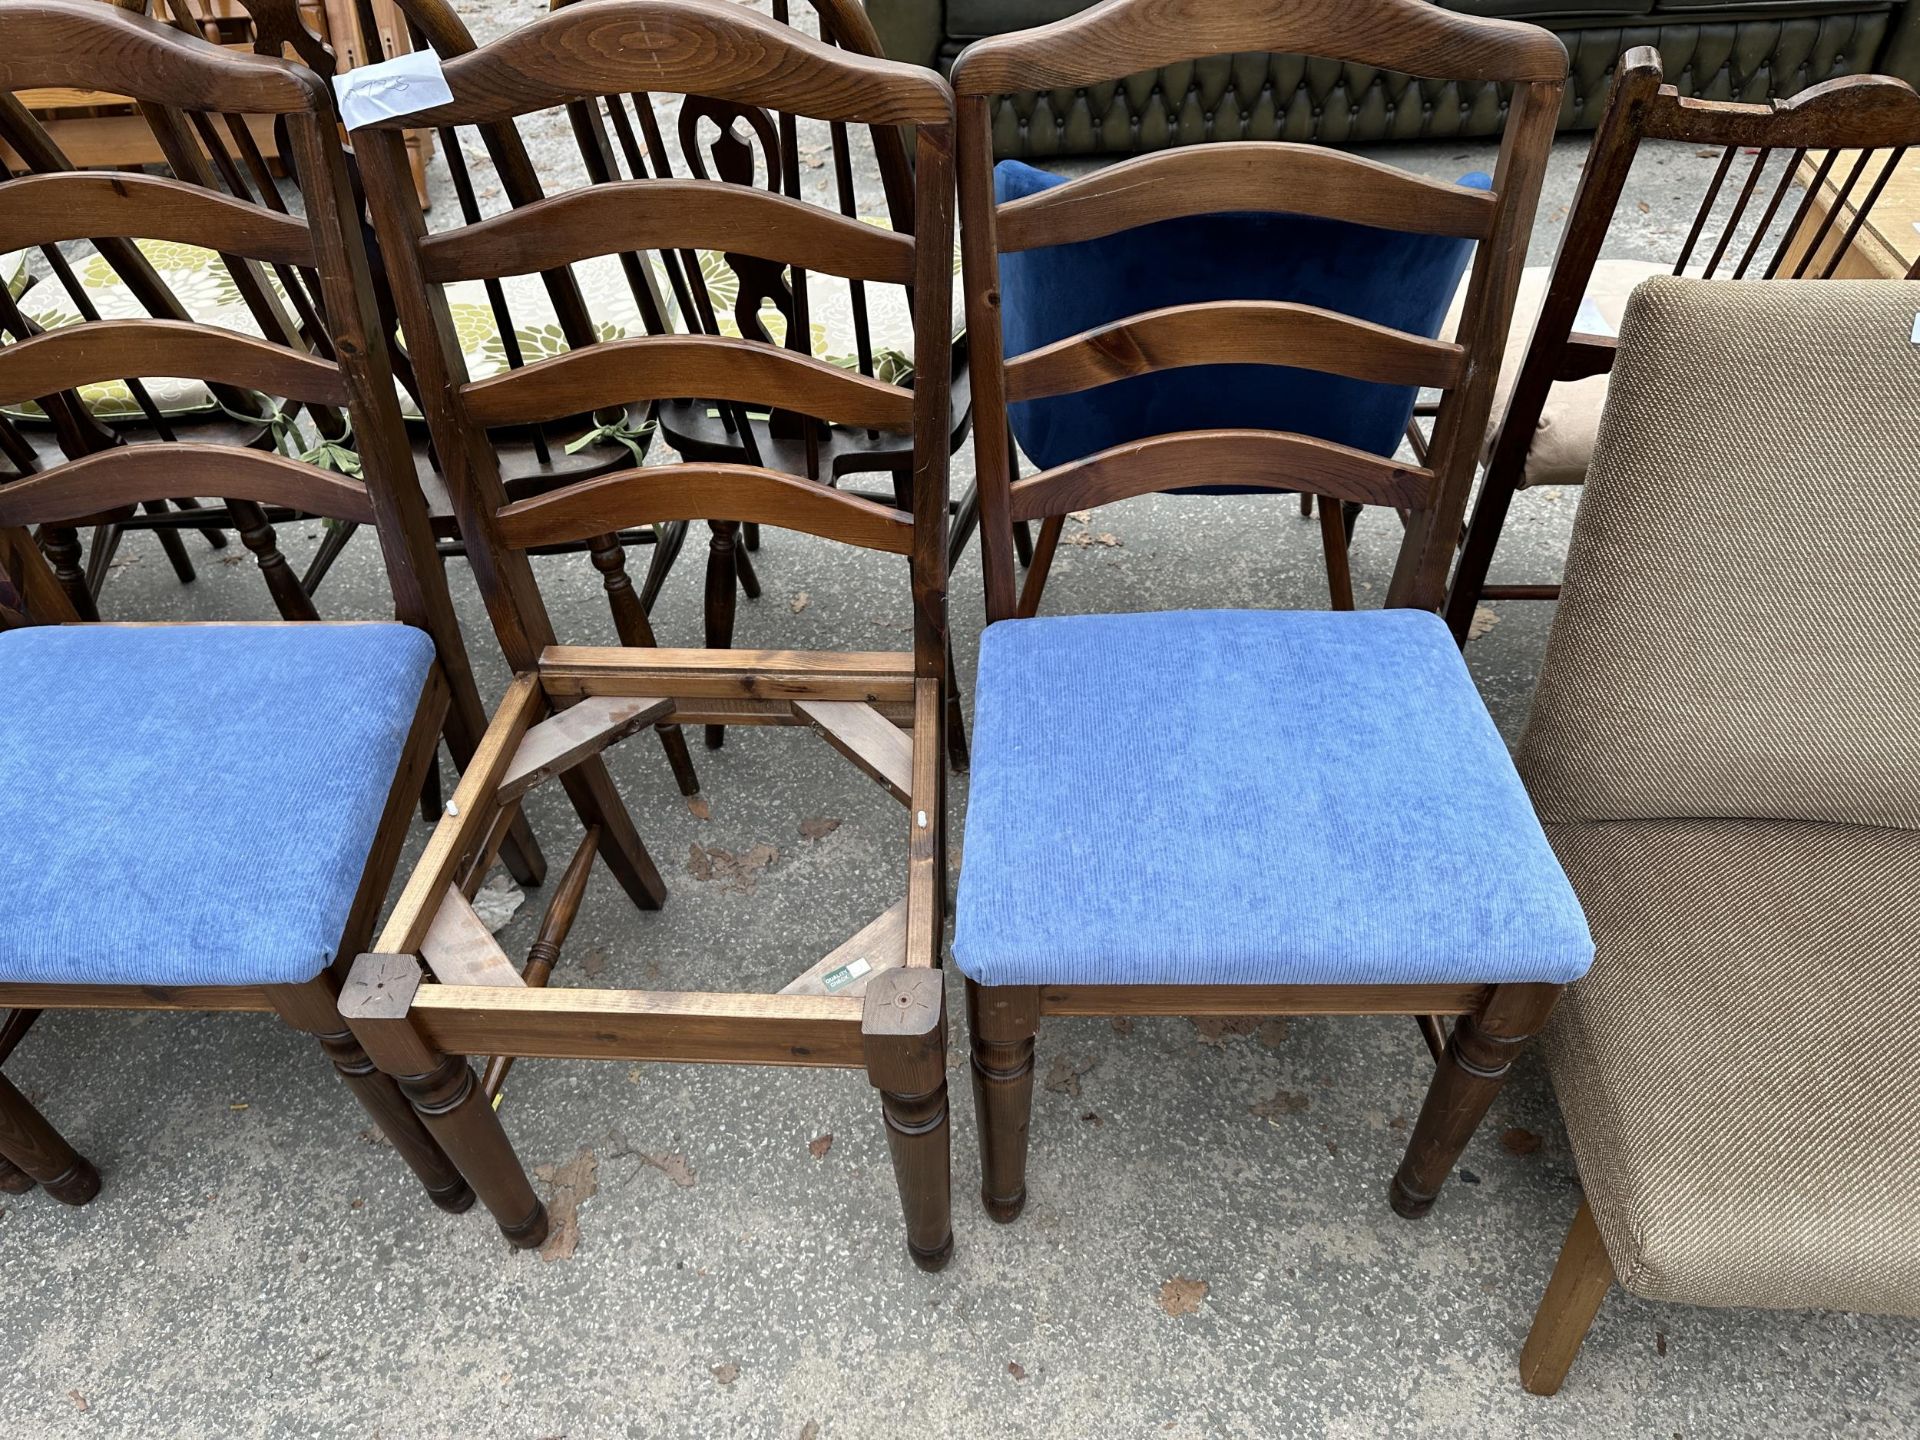 FIVE MODERN LADDER-BACK DINING CHAIRS, ONE BEING A CARVER AND BEDROOM CHAIR - Image 3 of 4